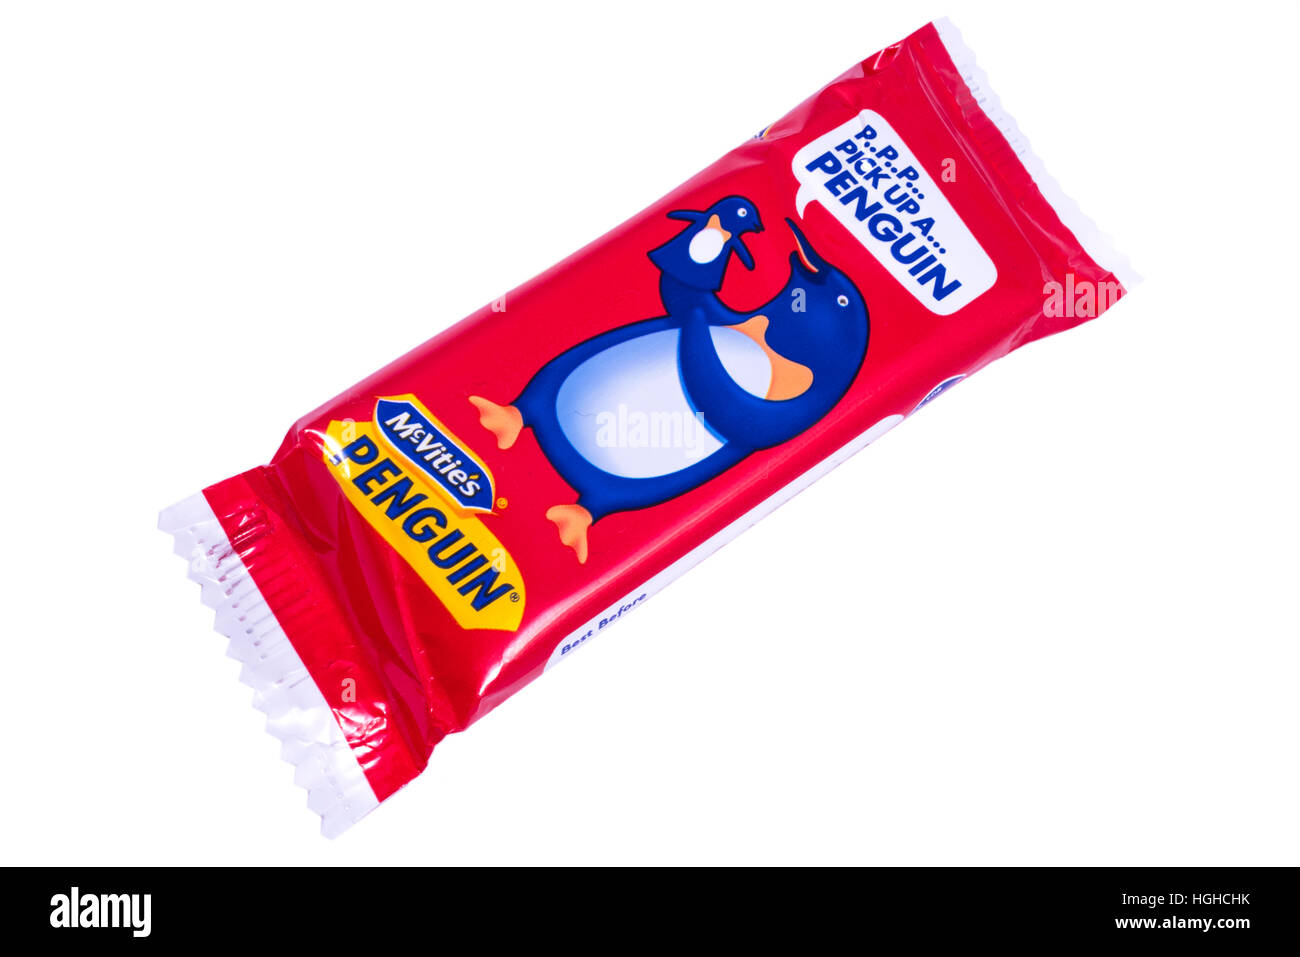 london-uk-january-4th-2017-an-unopened-penguin-chocolate-biscuit-bar-HGHCHK.jpg